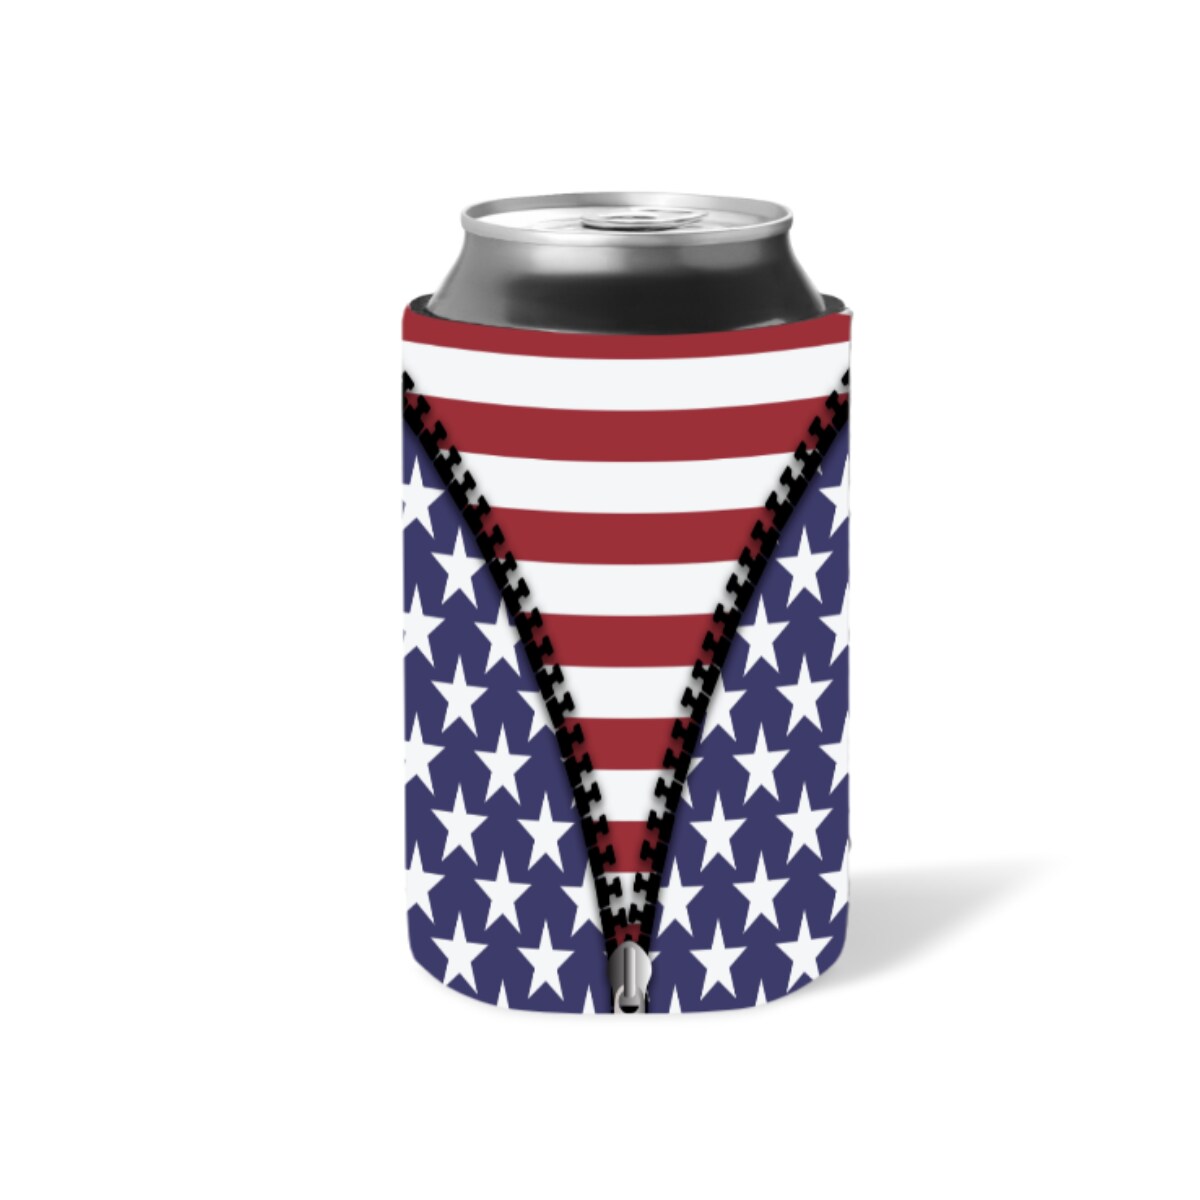 Crafting Custom Koozies with Sawgrass Sublimation